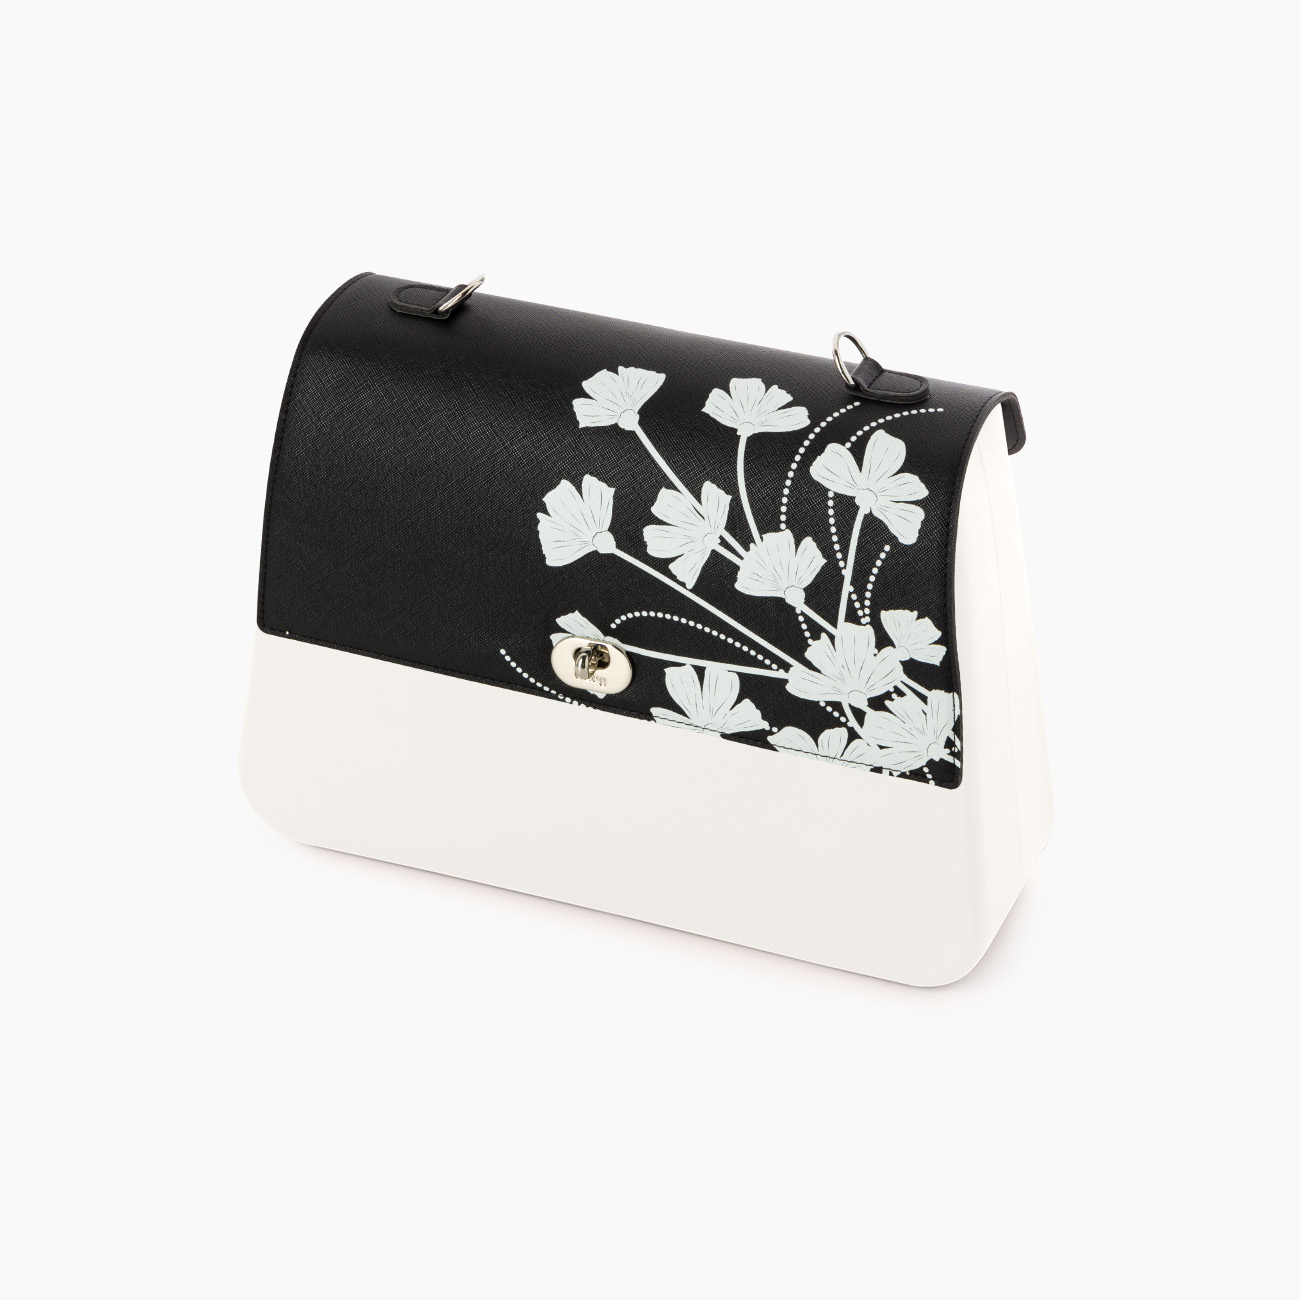 O Bag Queen Flap with Pocket Marigold Print Eco Leather – White/Black